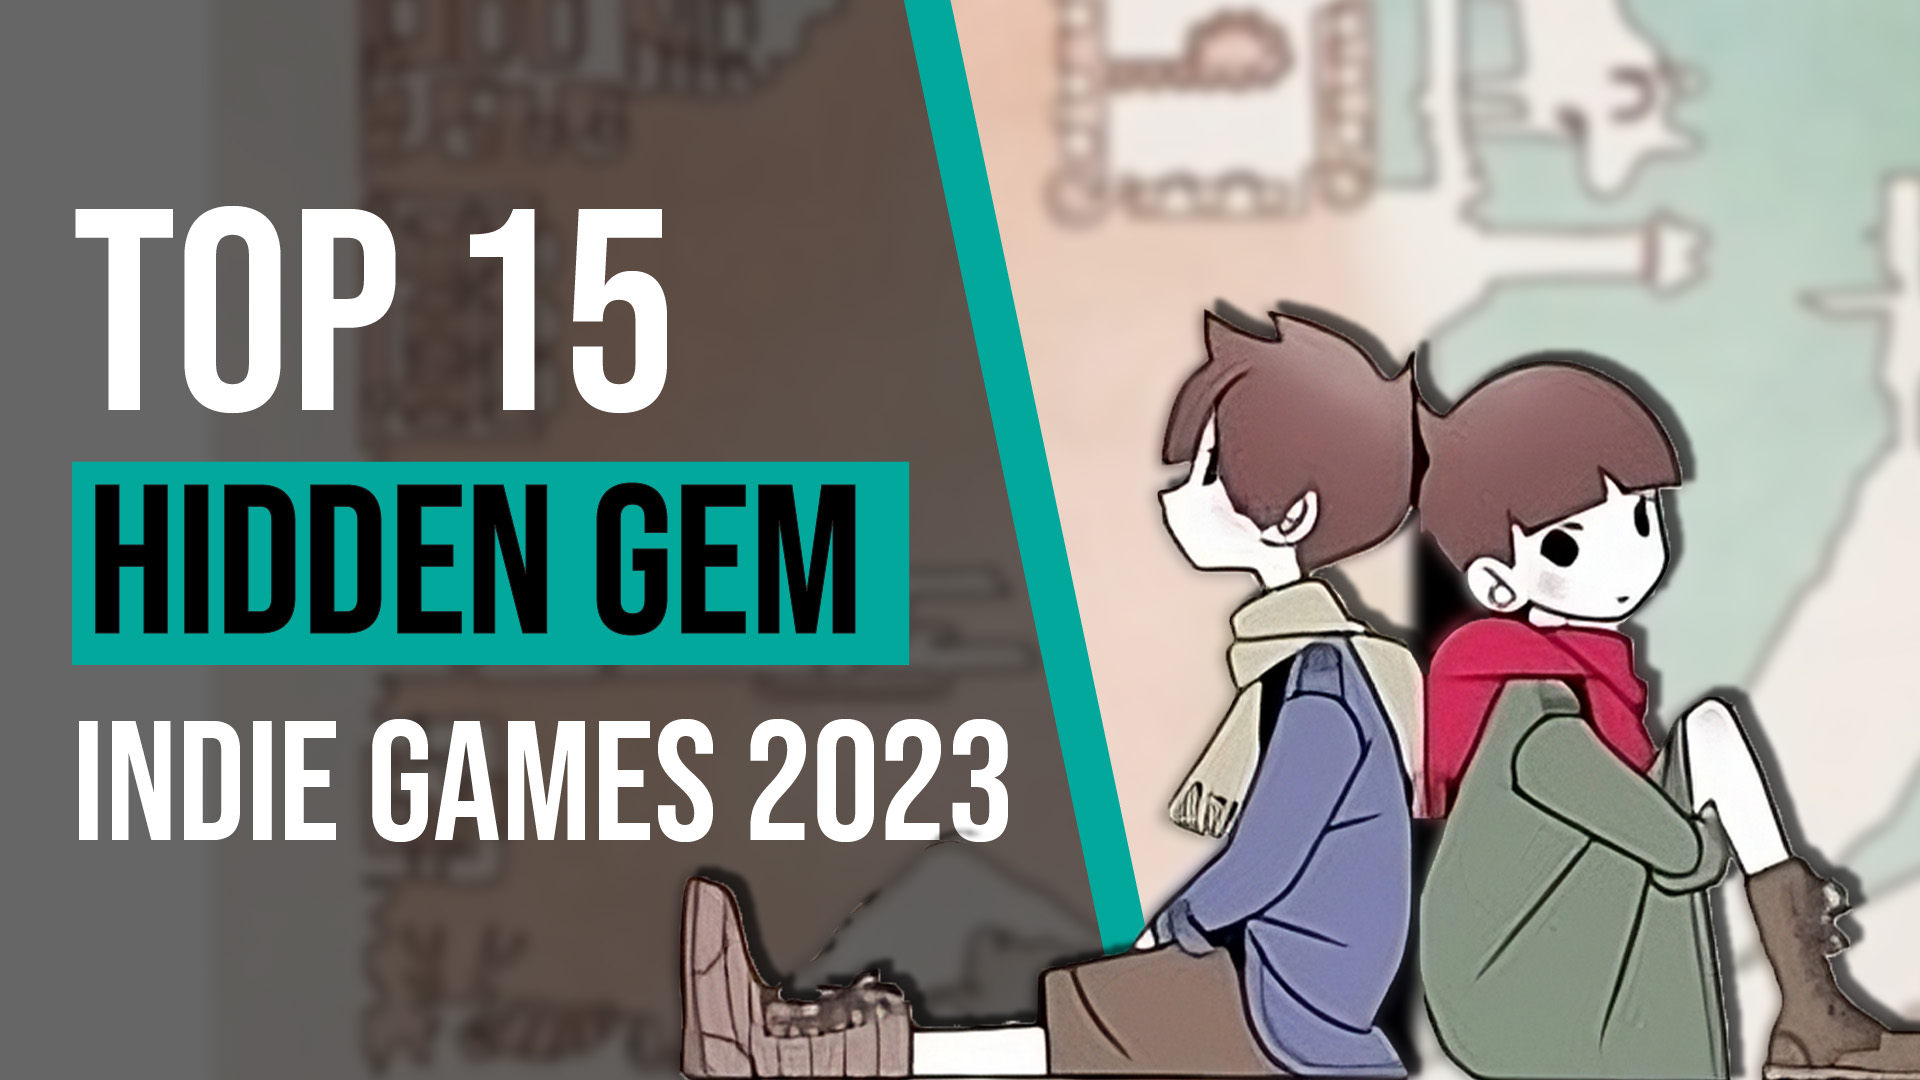 New games 2023: The biggest upcoming games dated